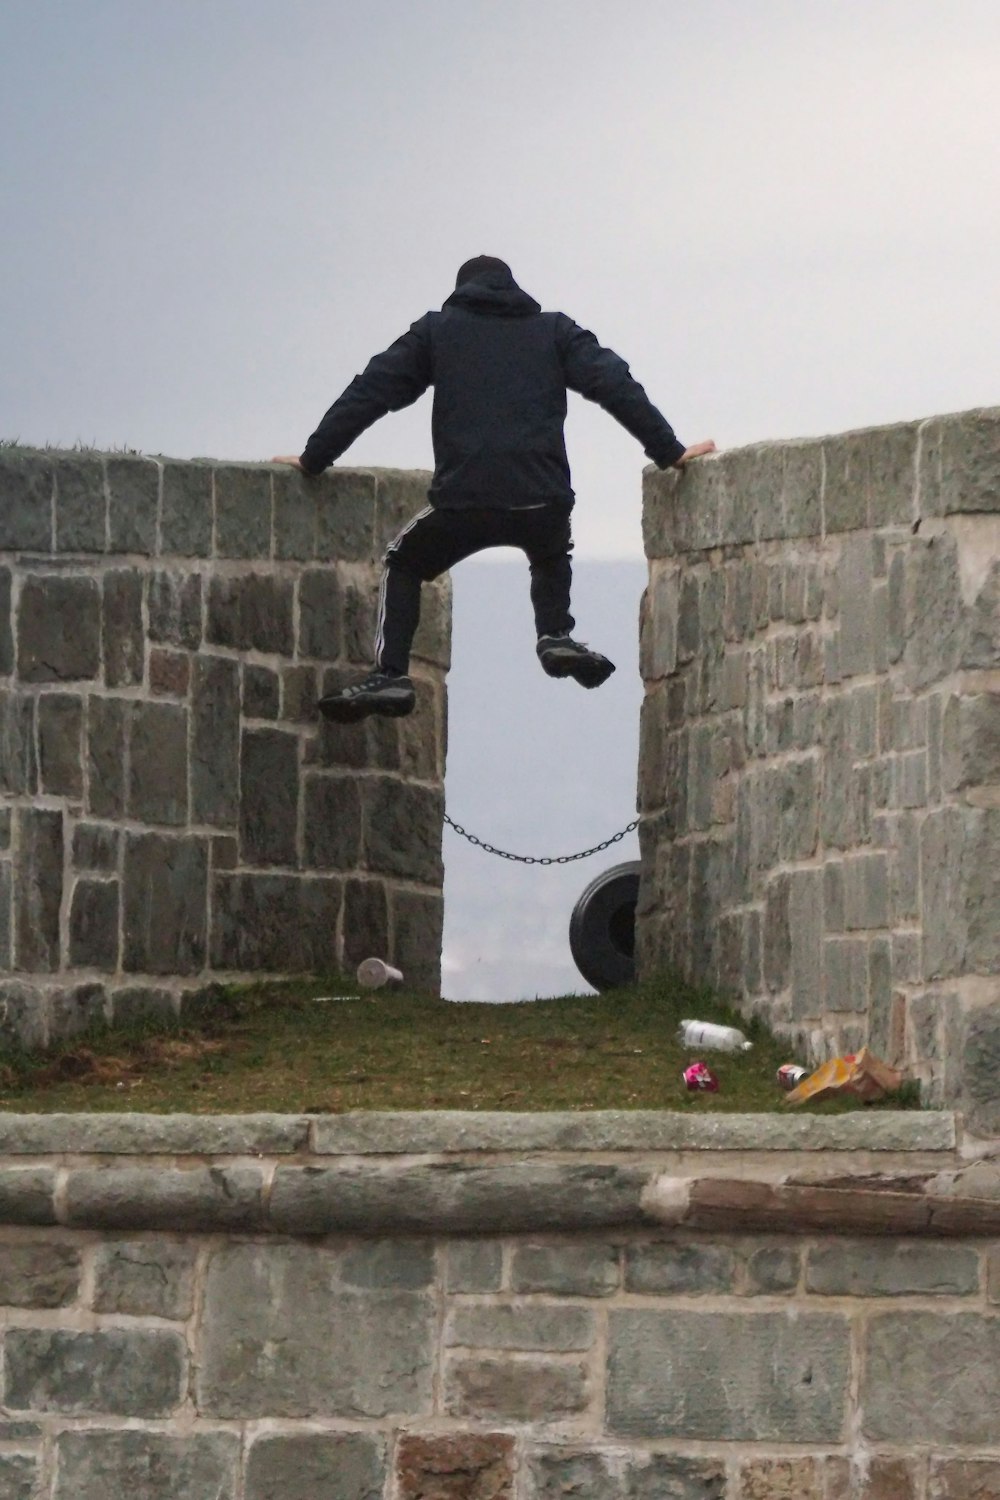 a man jumping off a wall into the air